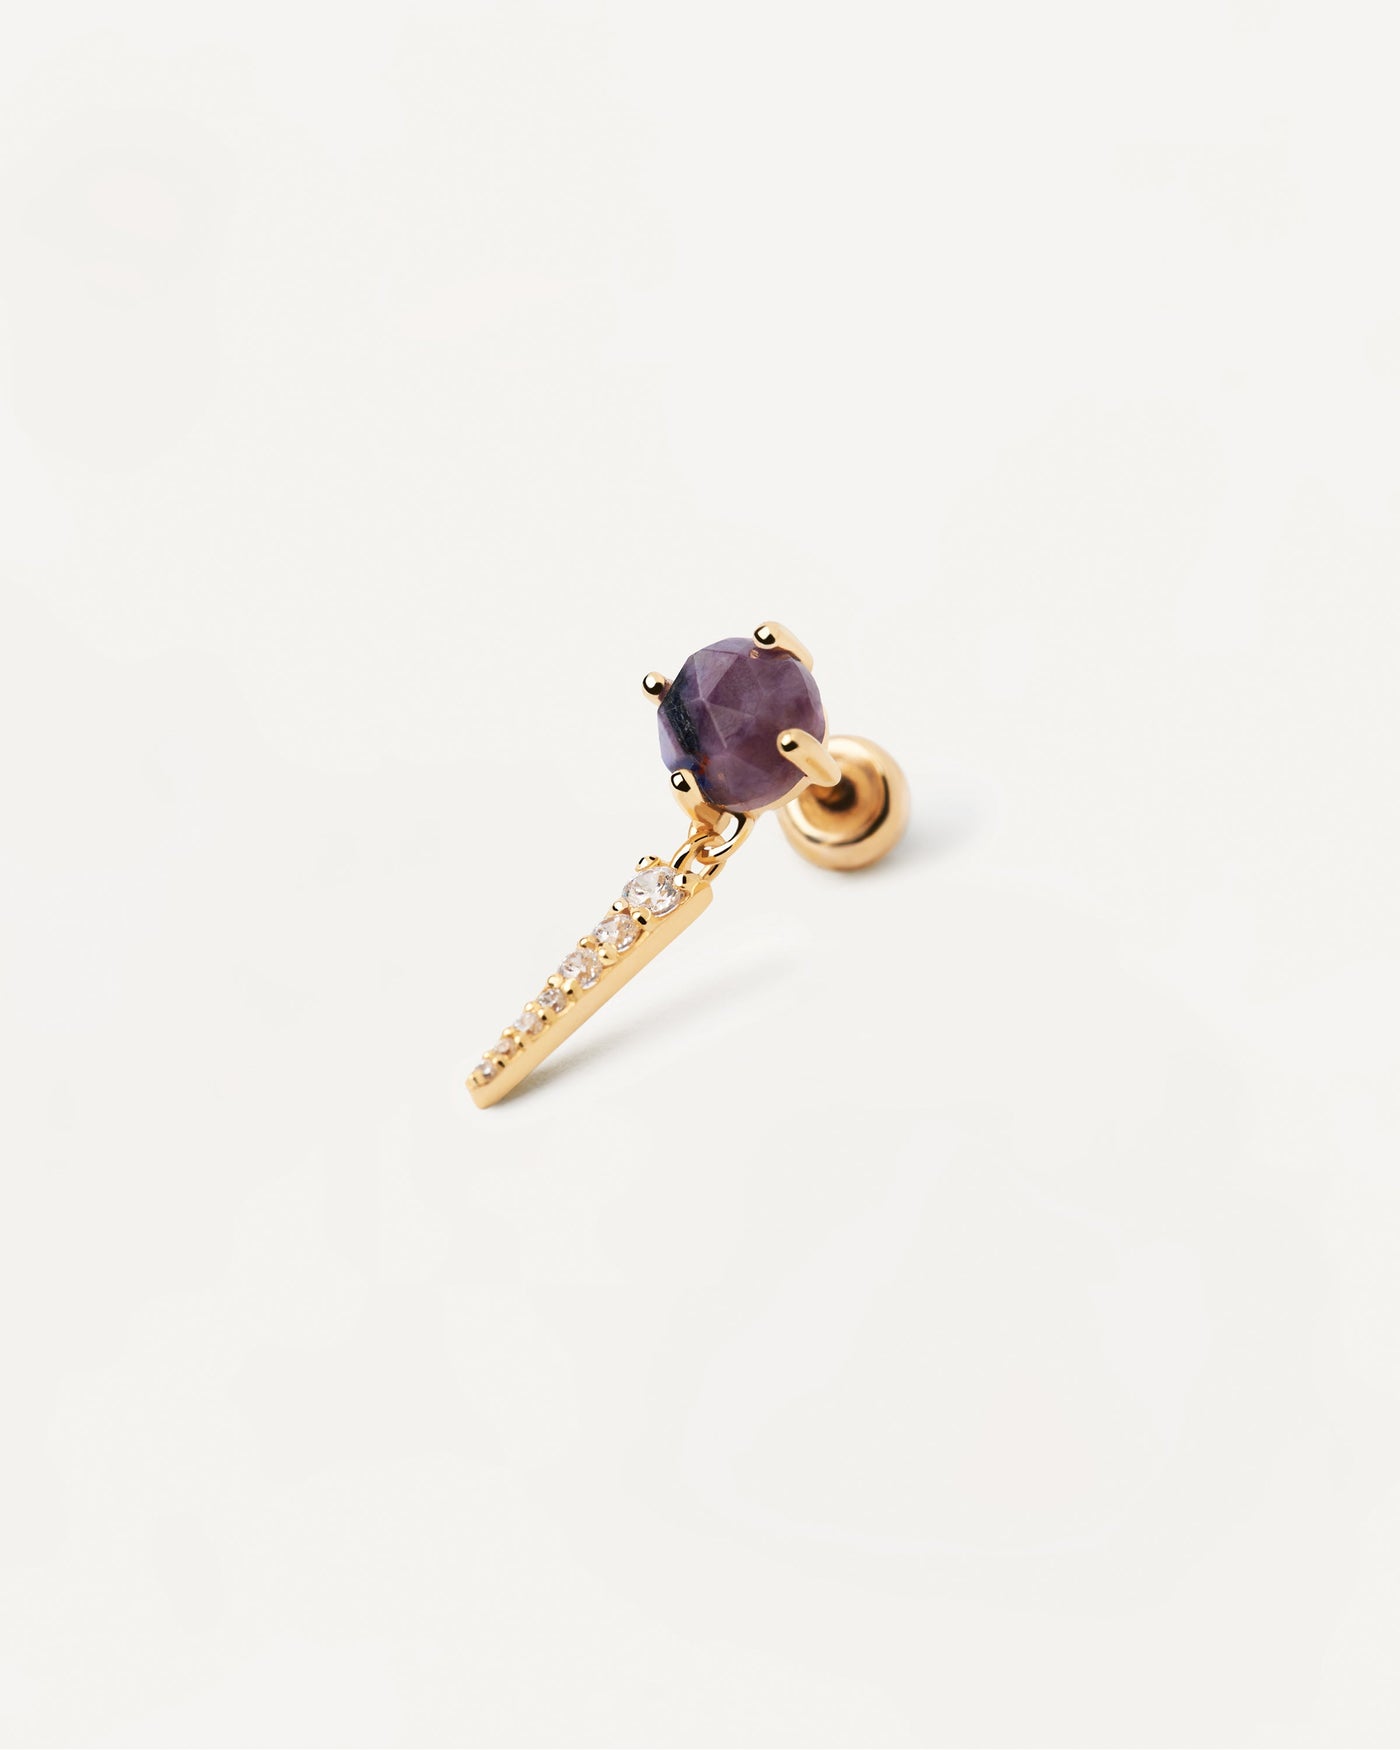 2023 Selection | Yoki Charoite Single Earring. Gold-plated ear piercing with purple gemstone and white zirconia pendant. Get the latest arrival from PDPAOLA. Place your order safely and get this Best Seller. Free Shipping.